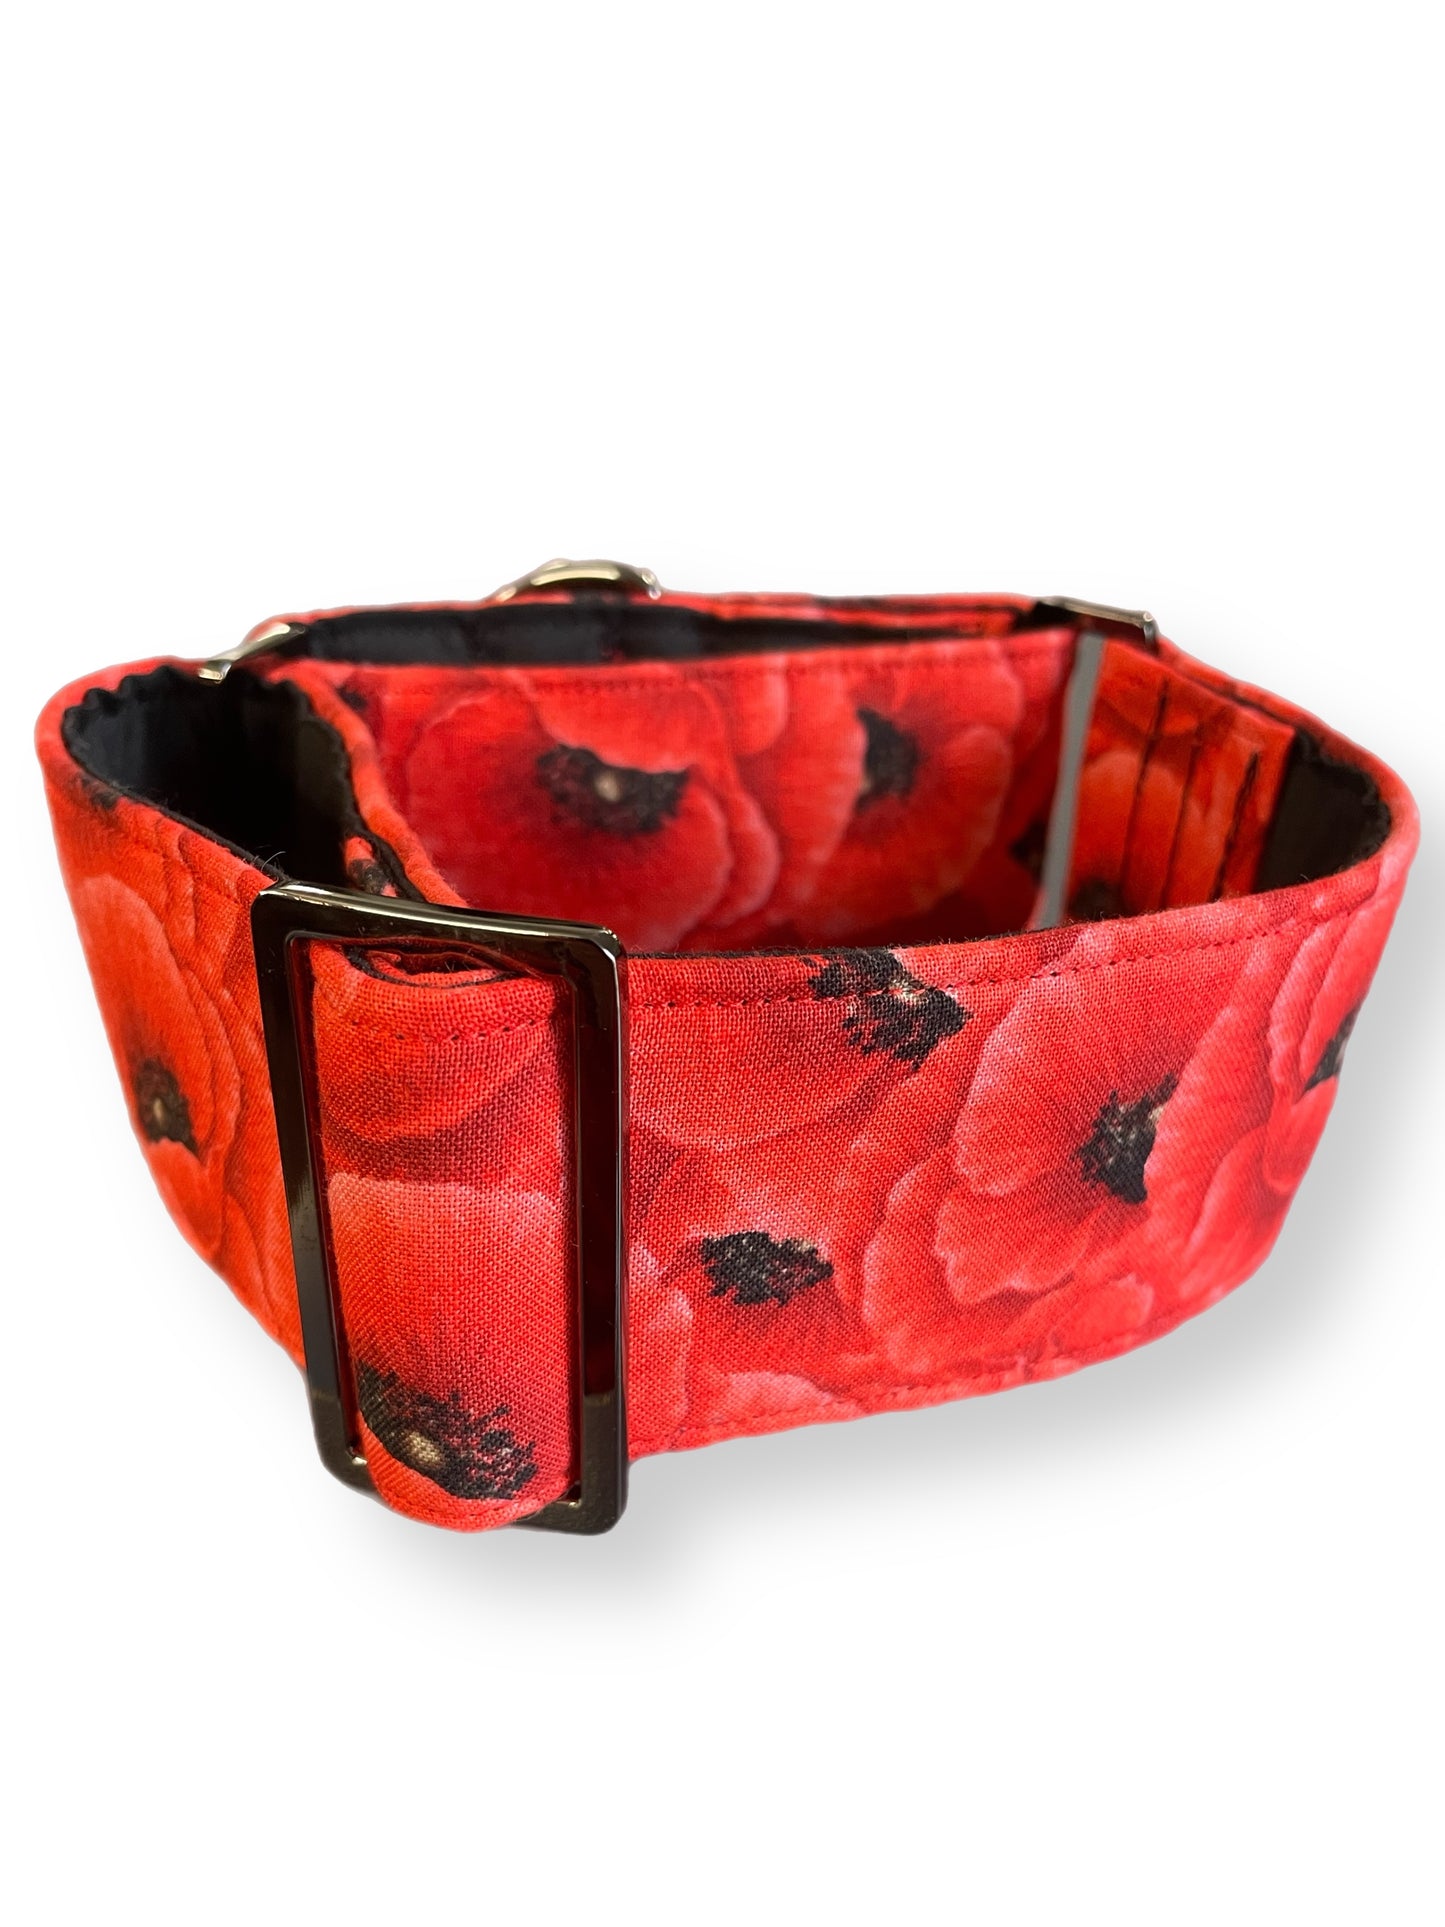 Beautiful red poppies on red greyhound Martingale collar cotton covered 50mm width